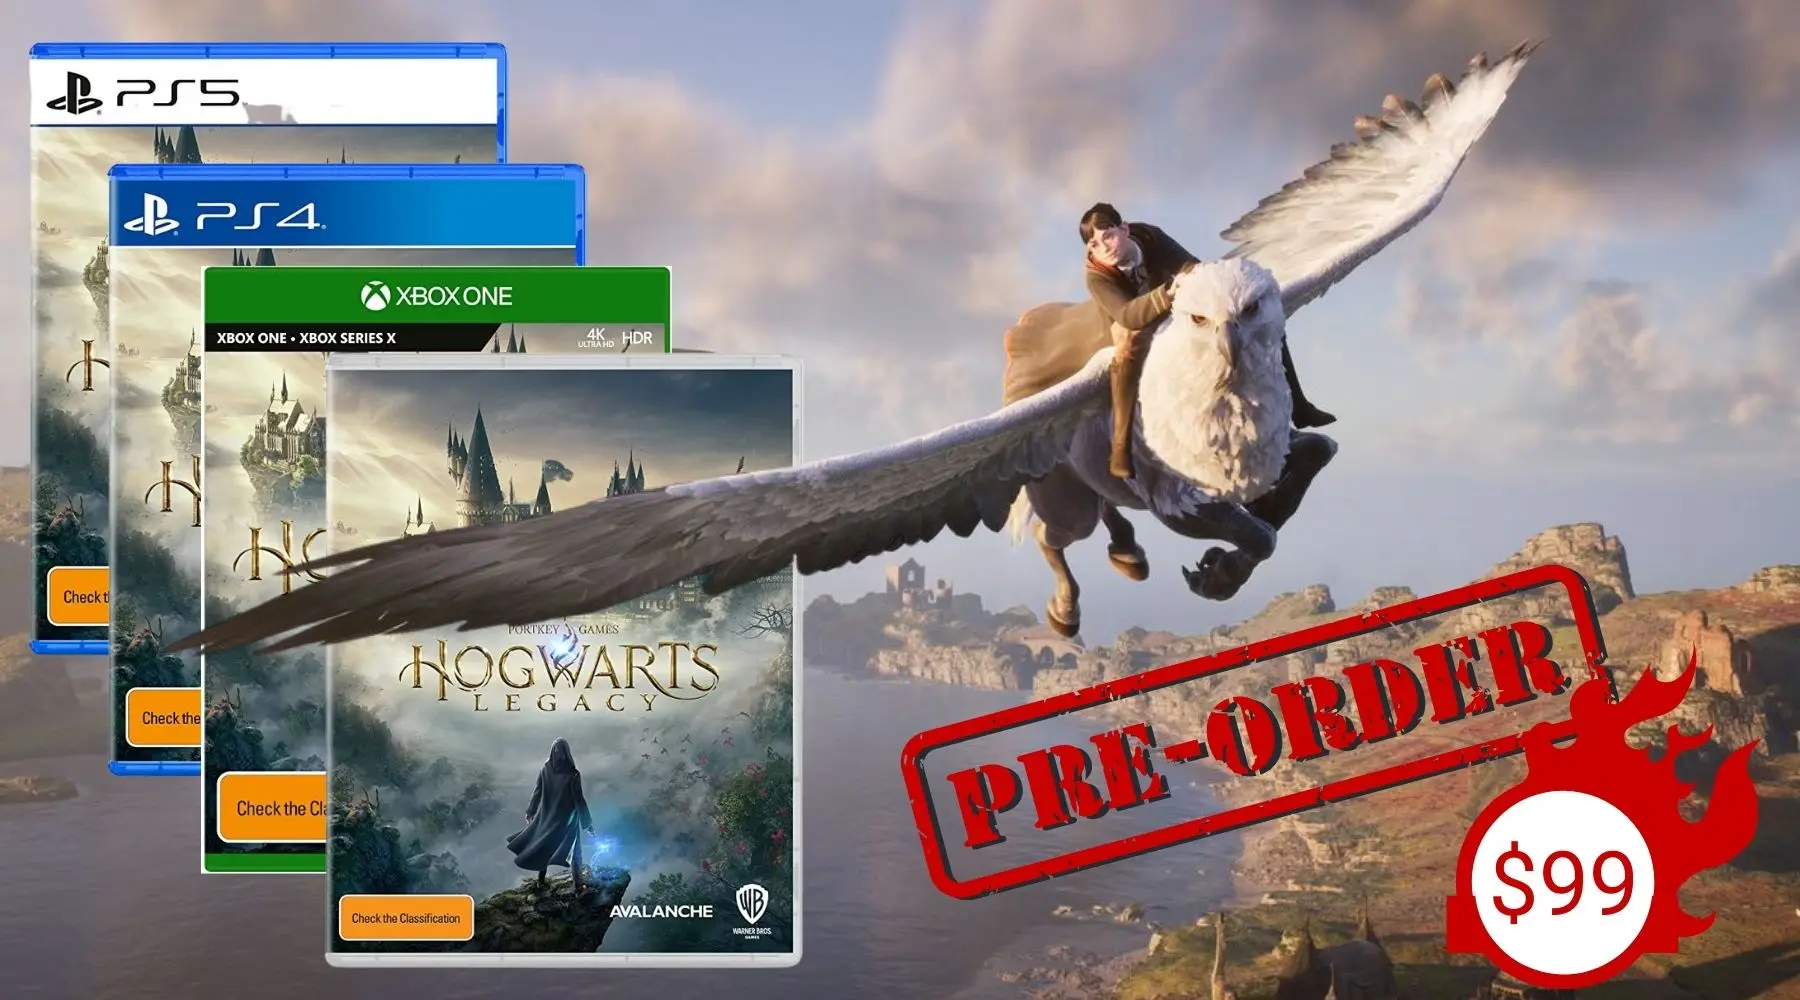 Hogwarts Legacy on PS4 and Xbox One – Everything You Need to Know